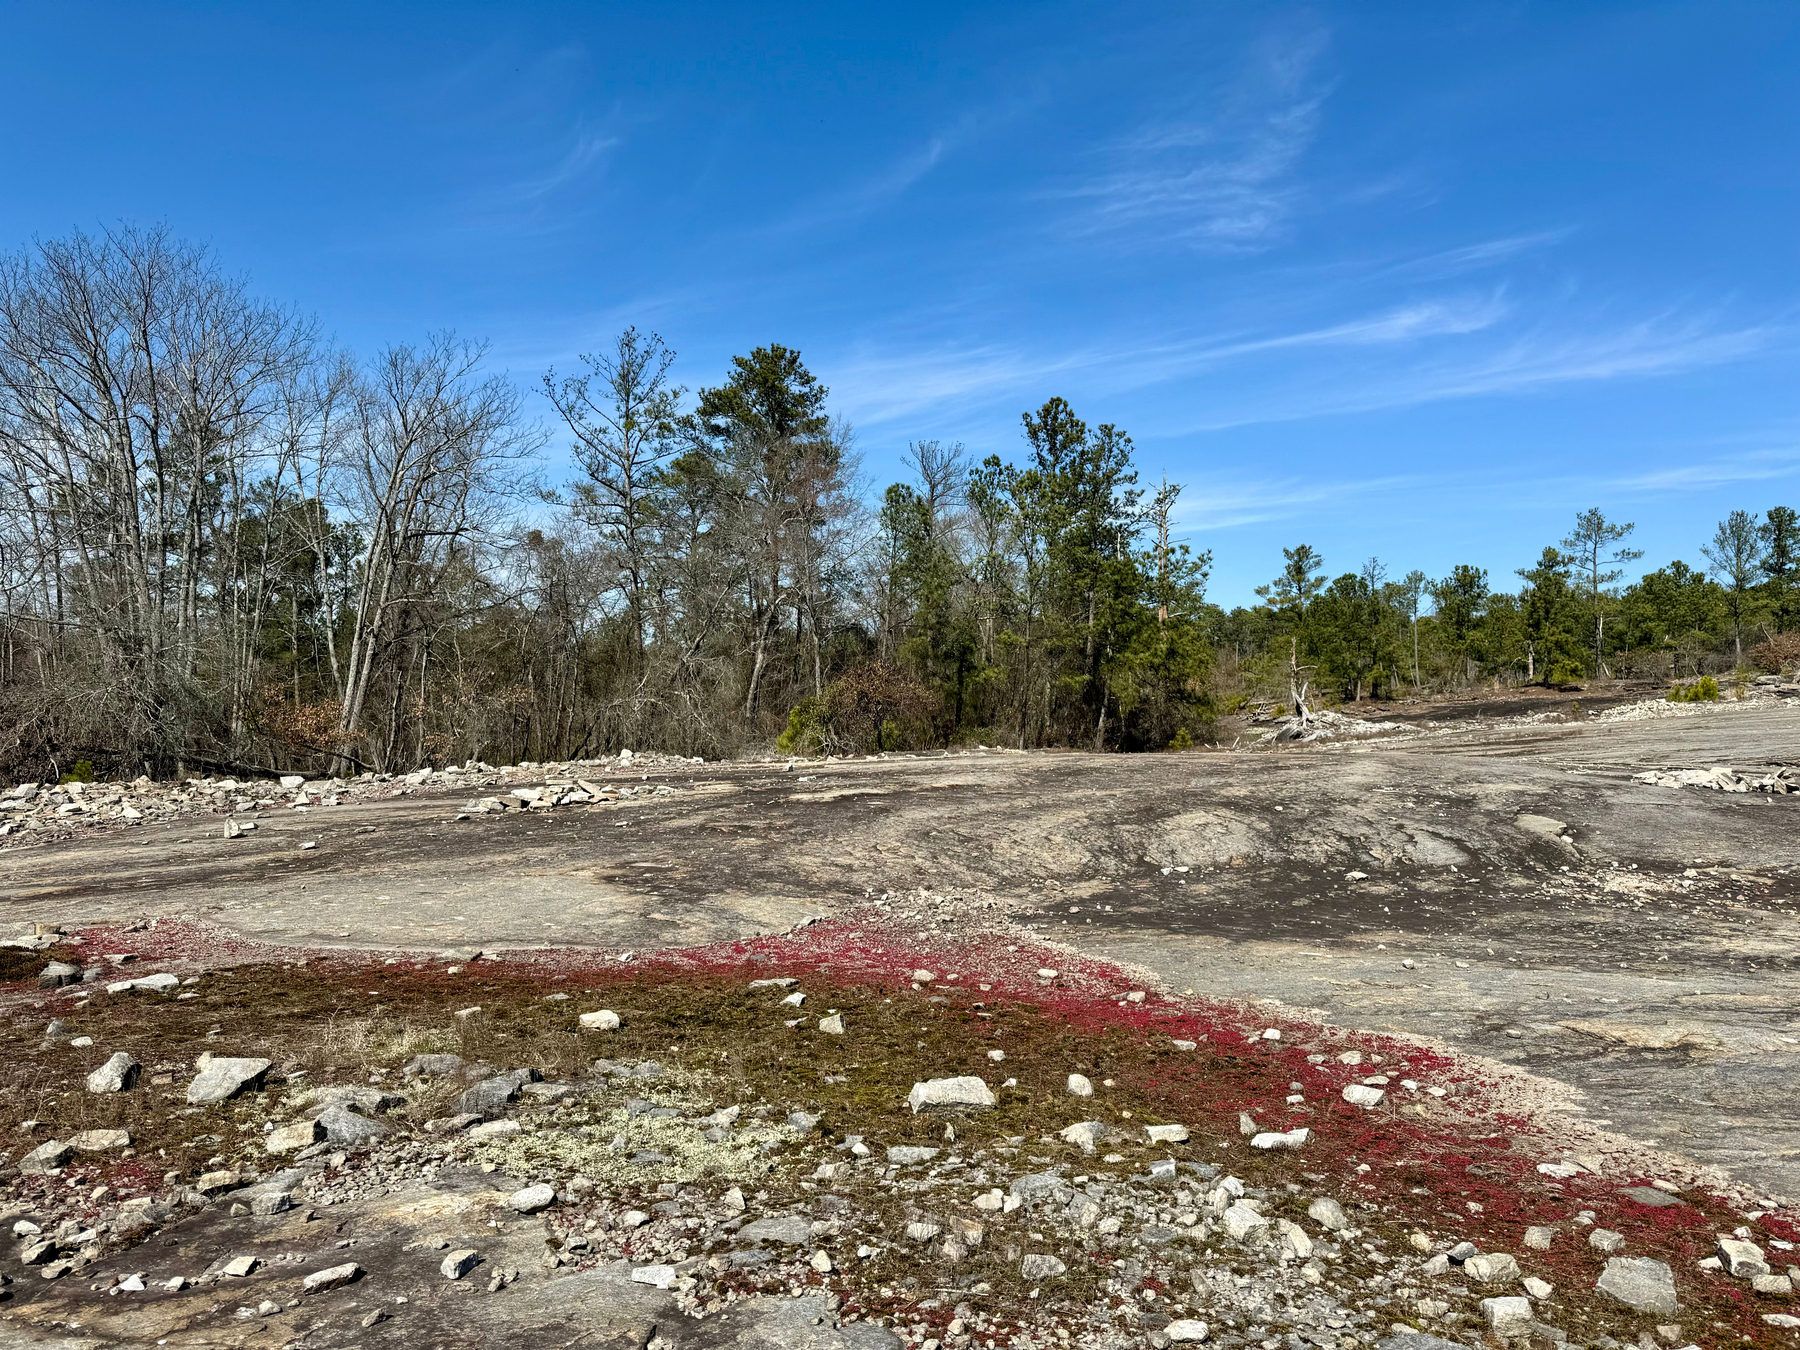 A barren landscape with exposed rocky terrain and sparse vegetation under a clear blue sky. The foreground shows patches of red-hued ground cover, and scattered rocks and trees are visible in the distance.